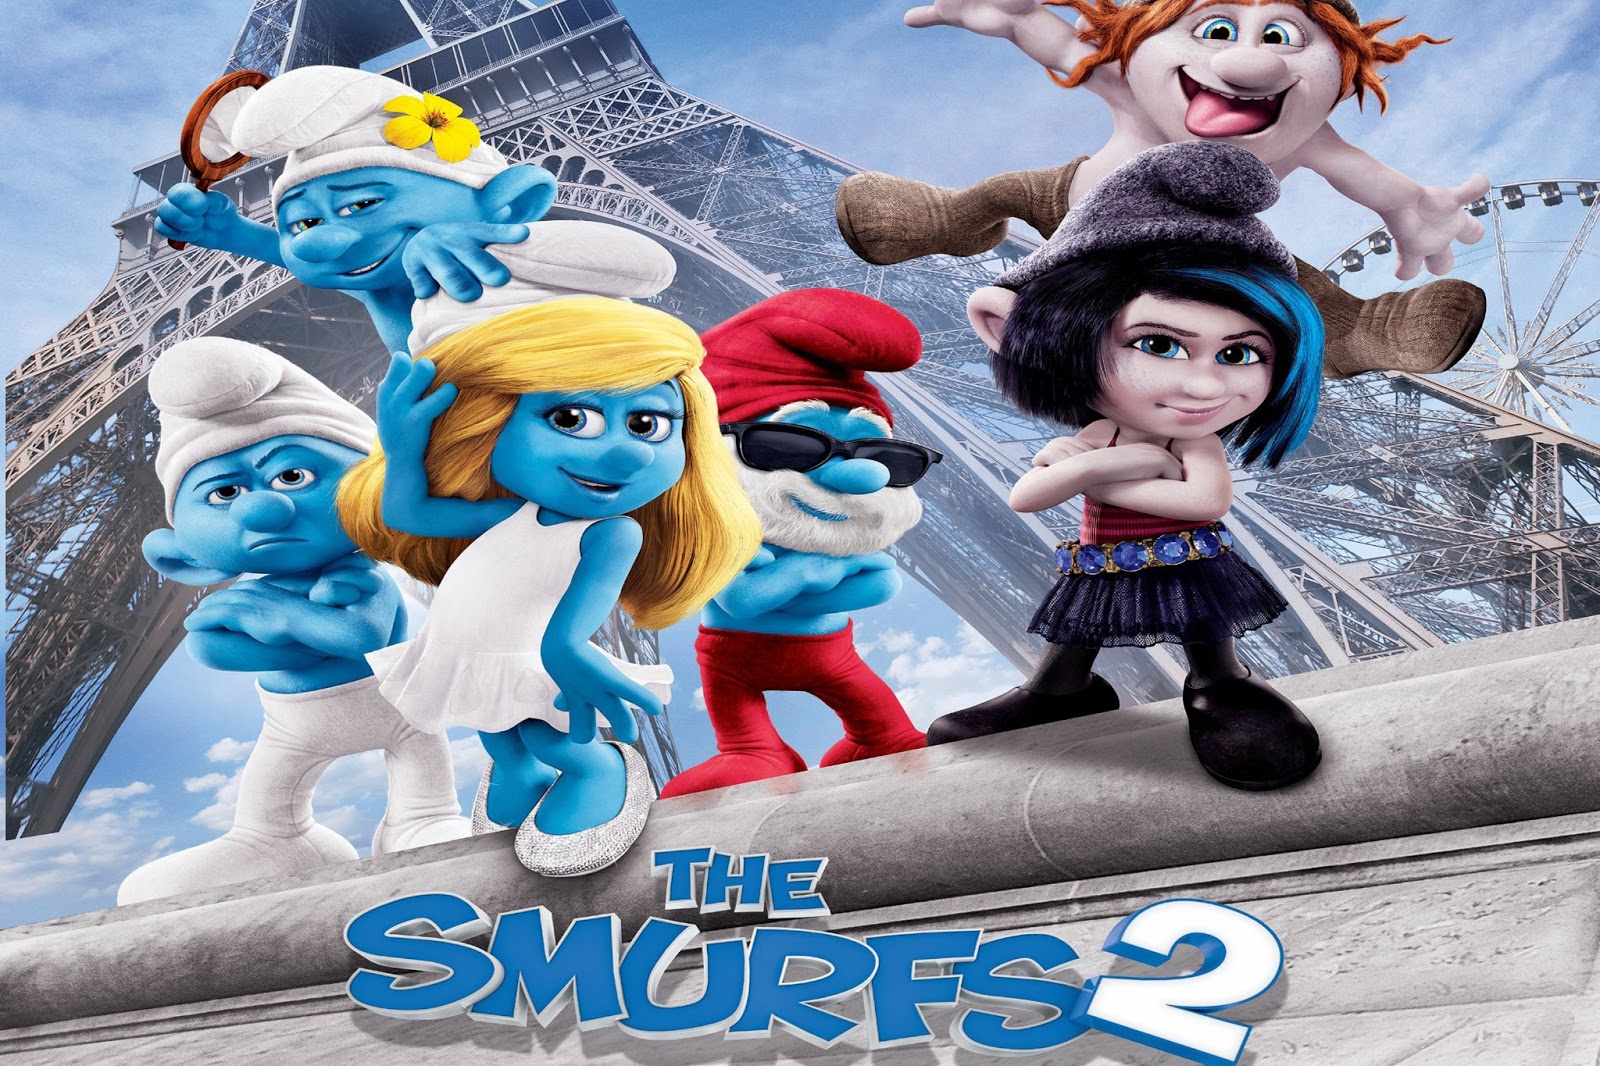 The Smurfs 2 HD wallpapers | HD Wallpapers (High ...